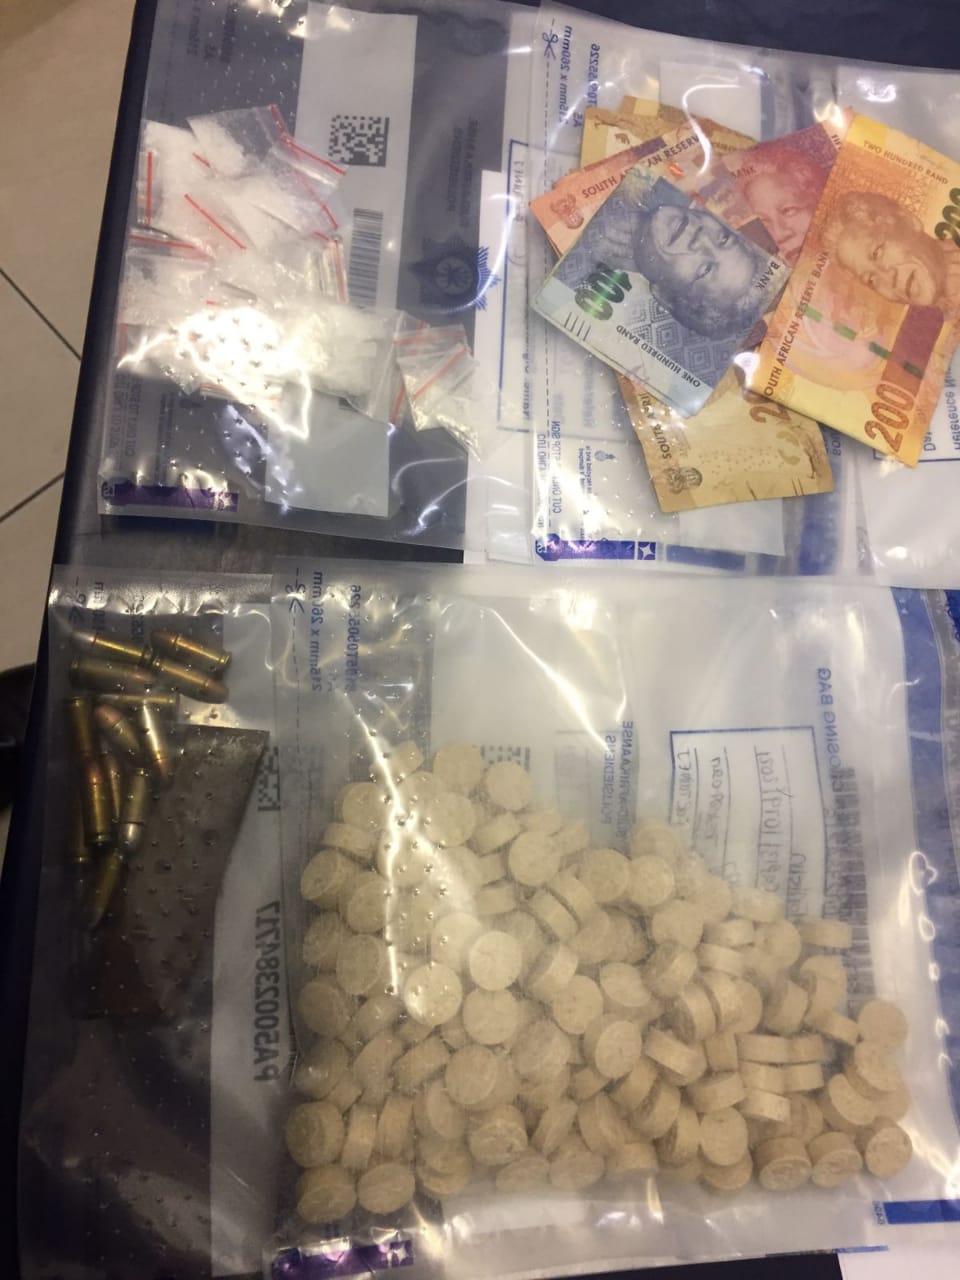 Suspect arrested for drugs and ammunition in Kraaifontein